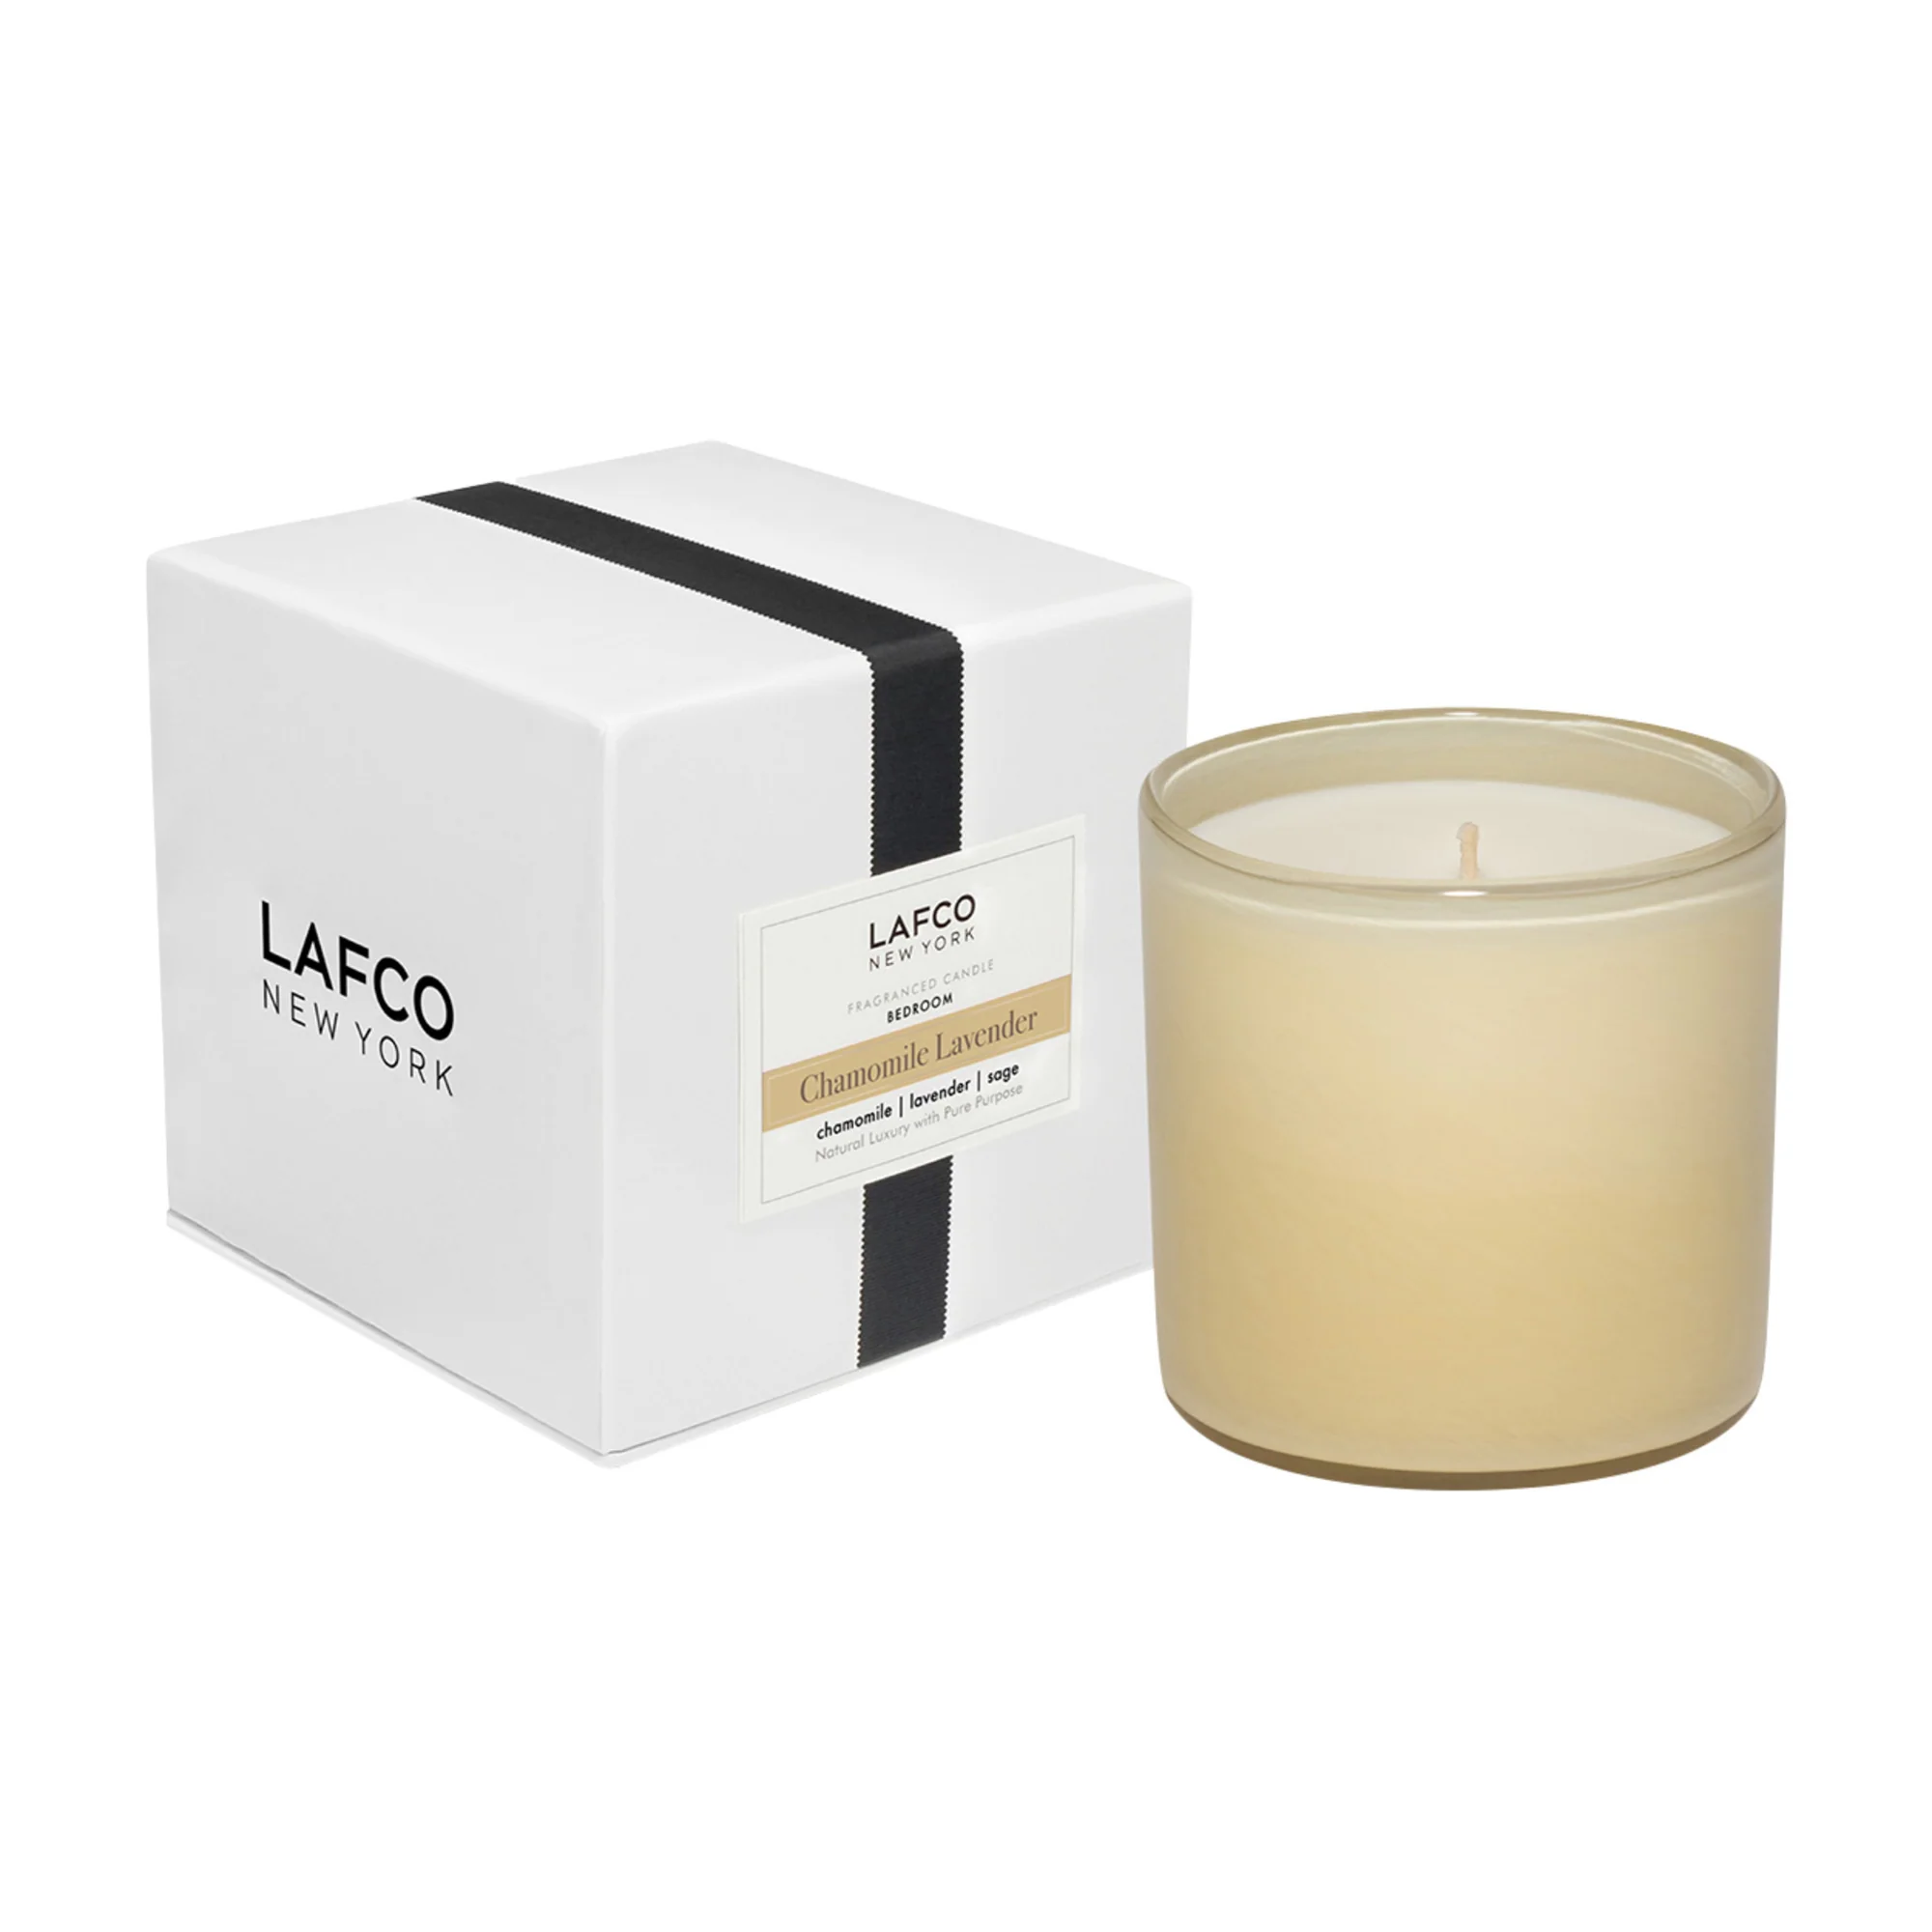 Chamomile Lavender (Bedroom) Lafco Candle